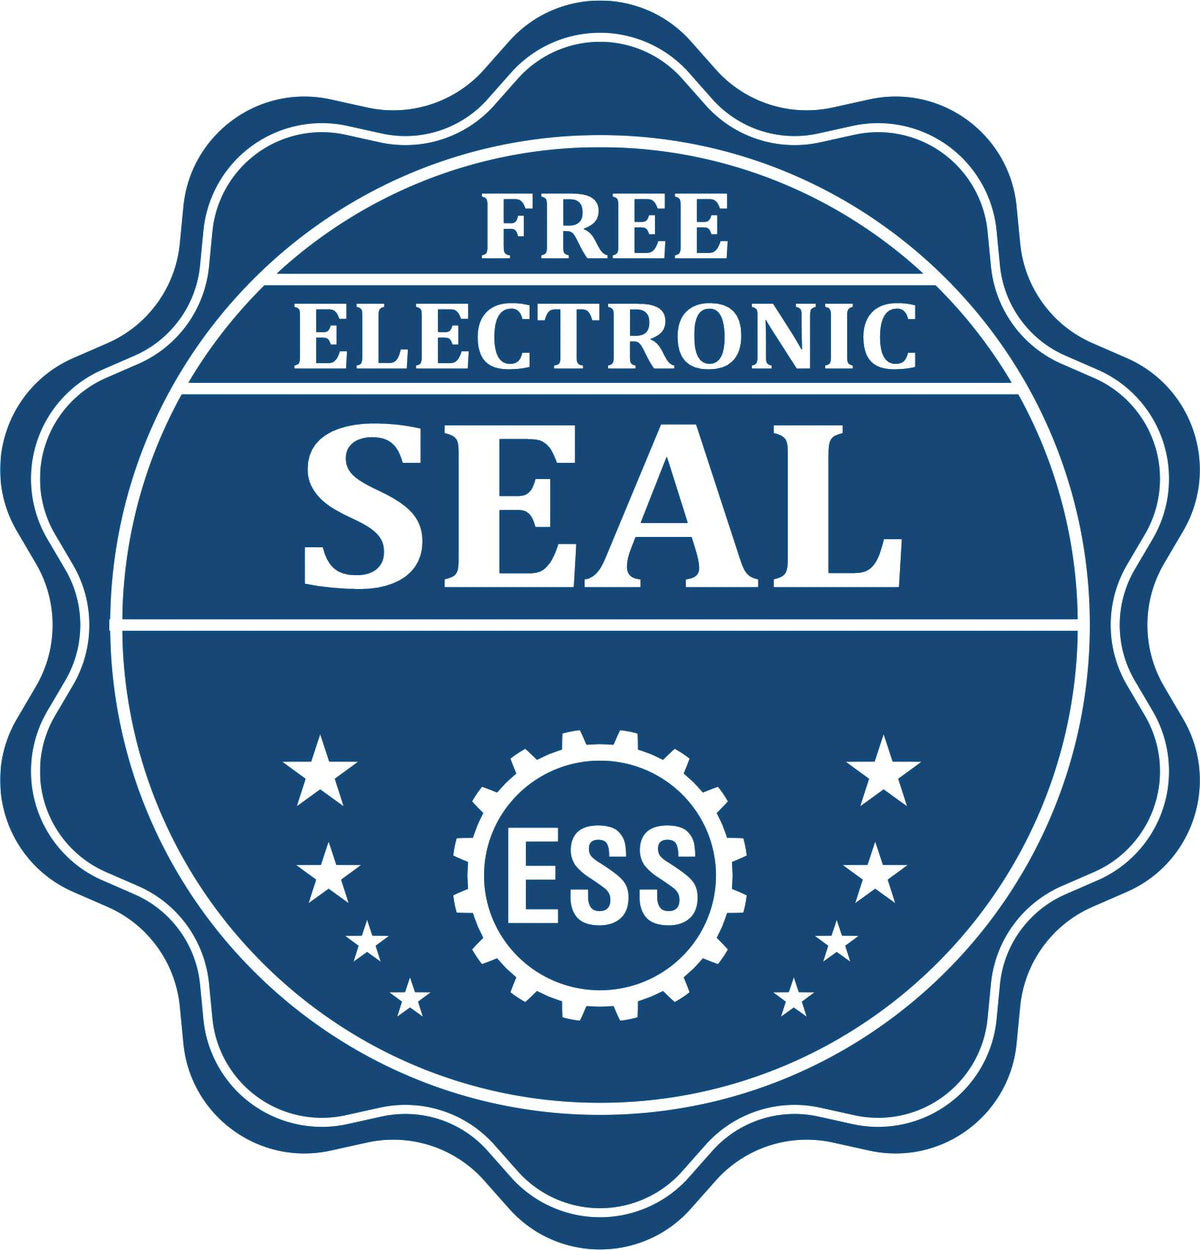 A badge showing a free electronic seal for the Slim Pre-Inked Guam Professional Geologist Seal Stamp with stars and the ESS gear on the emblem.